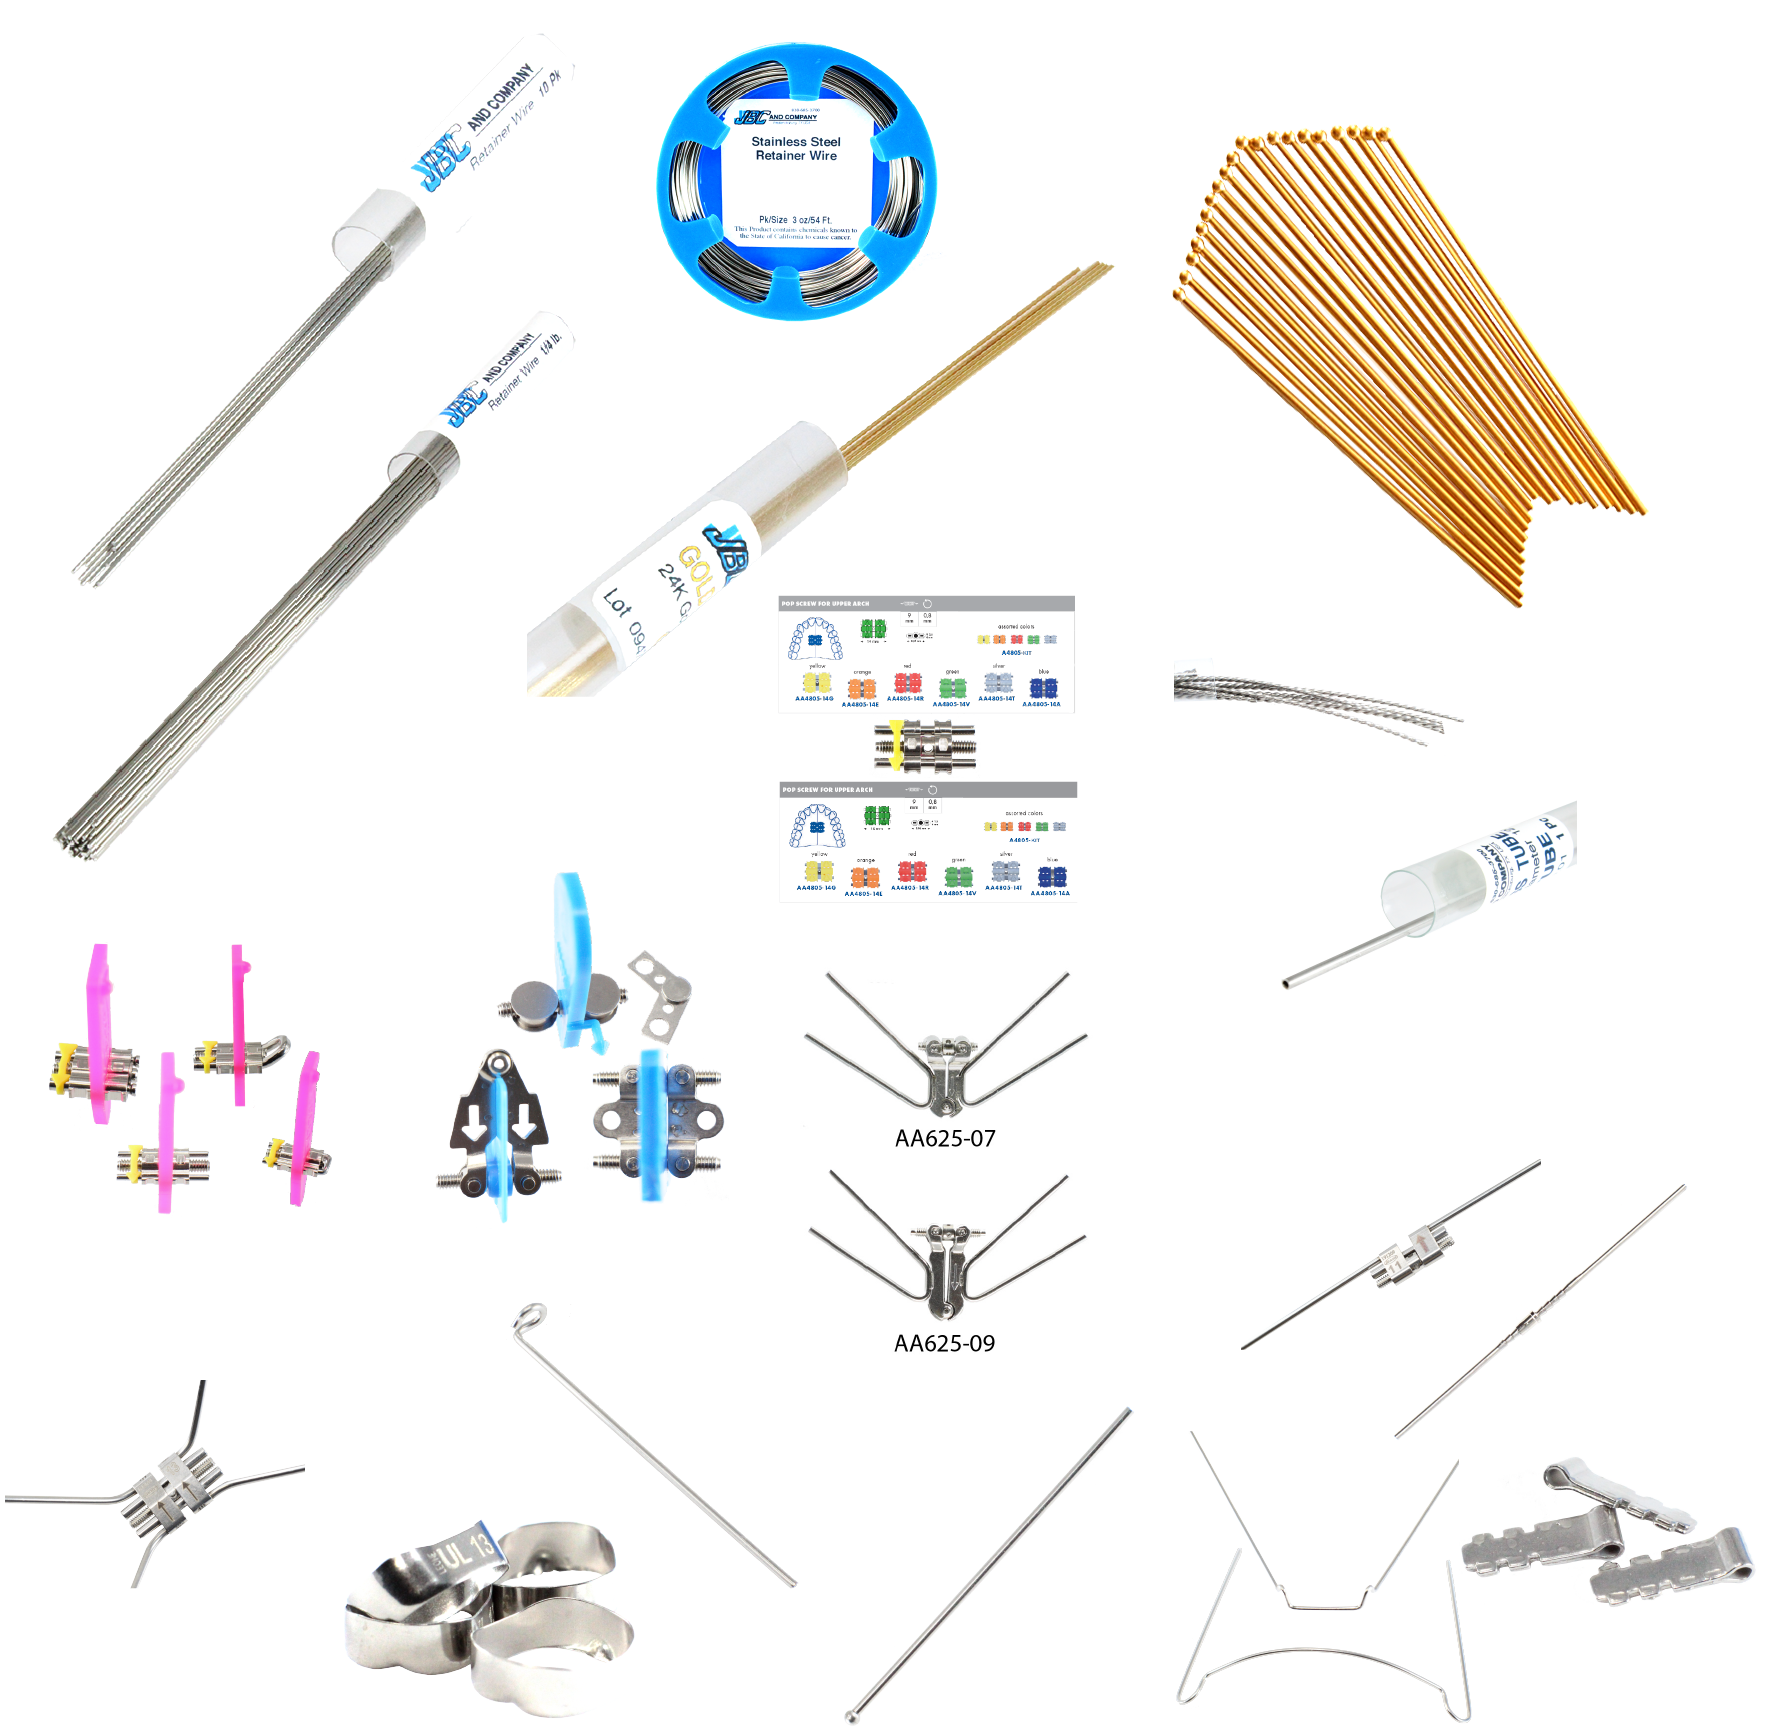 images/Stainles Steel Components Collage 333.png